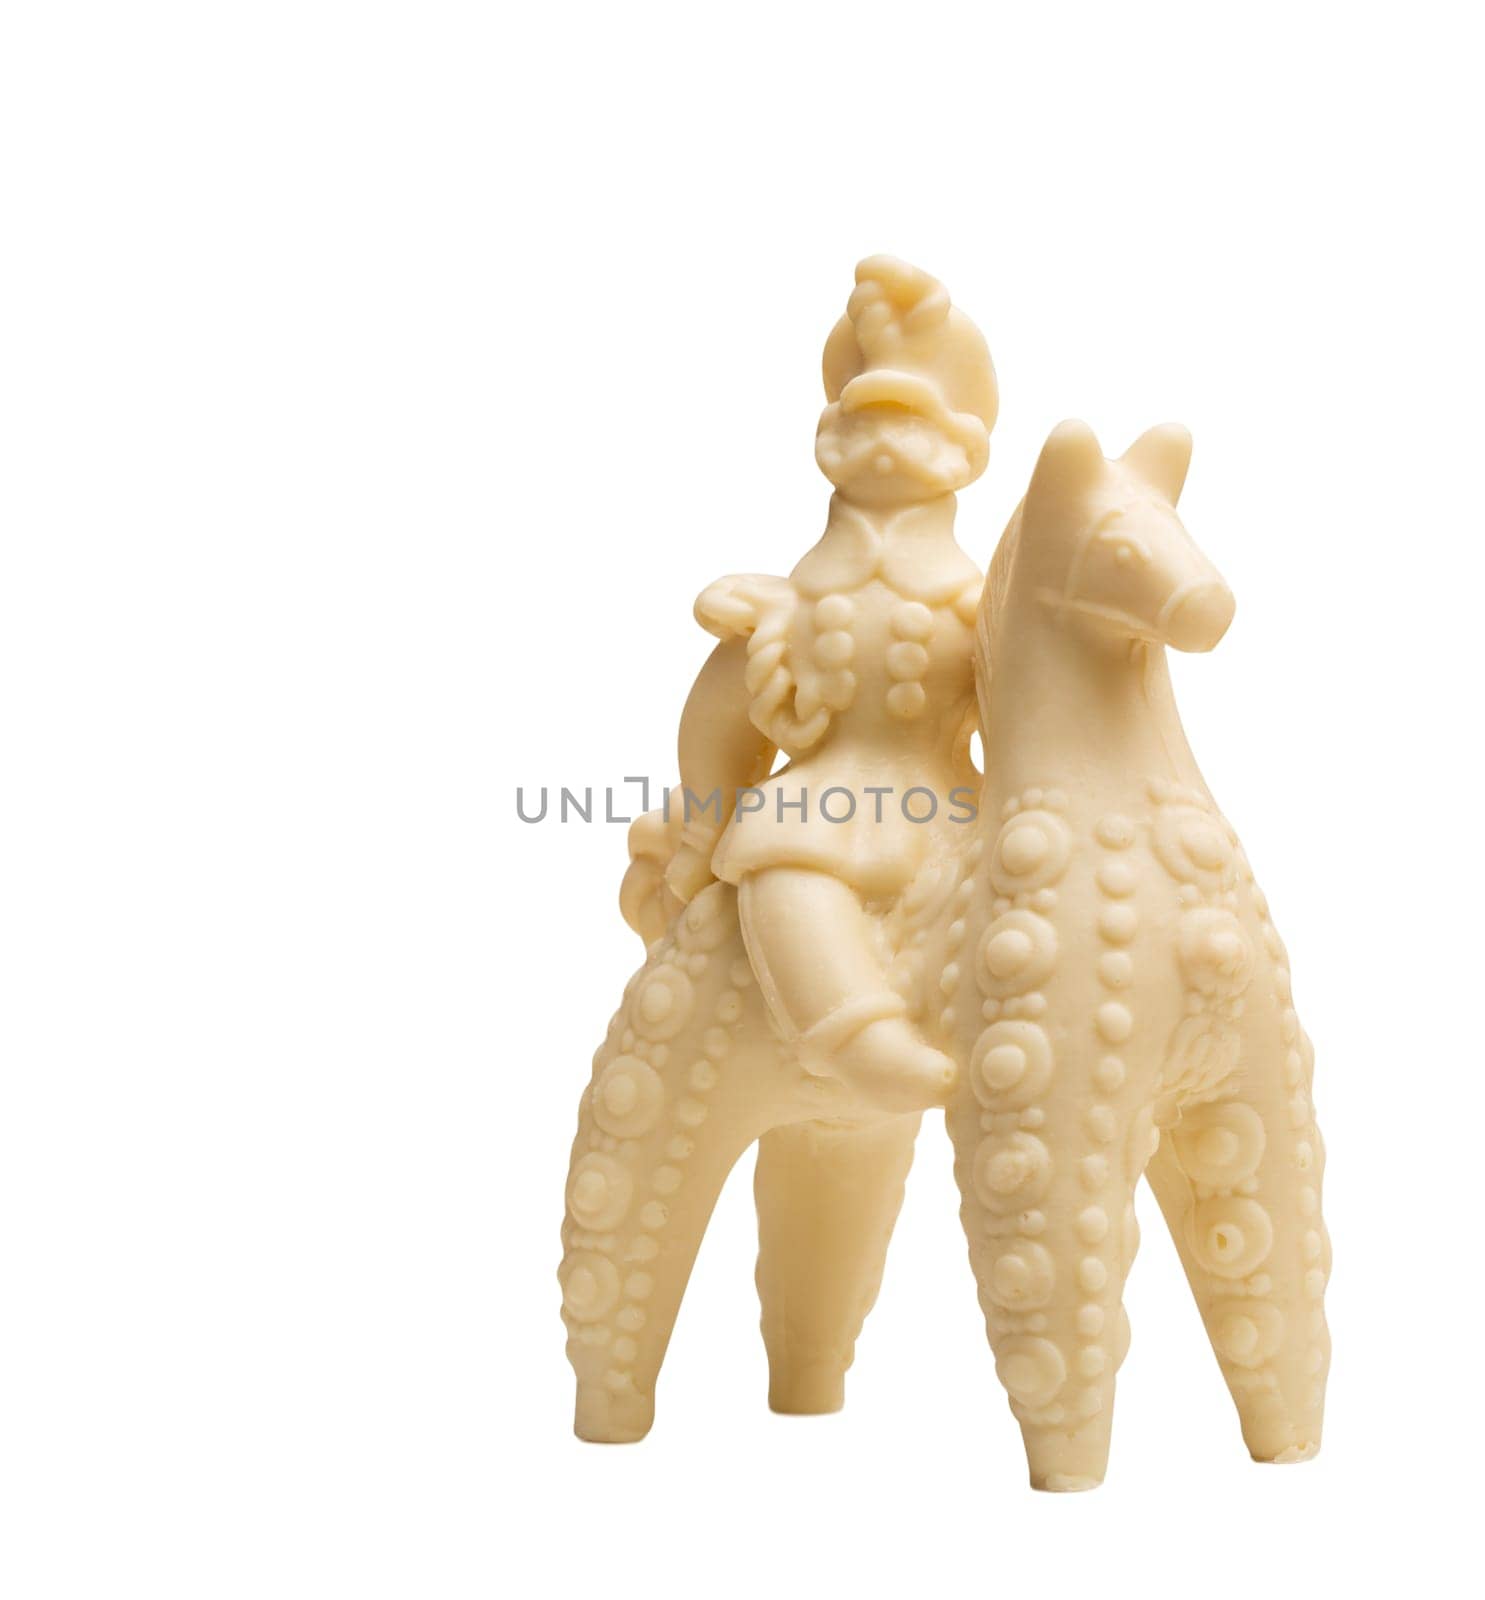 Tasty white chocolate figurines - knight and horse